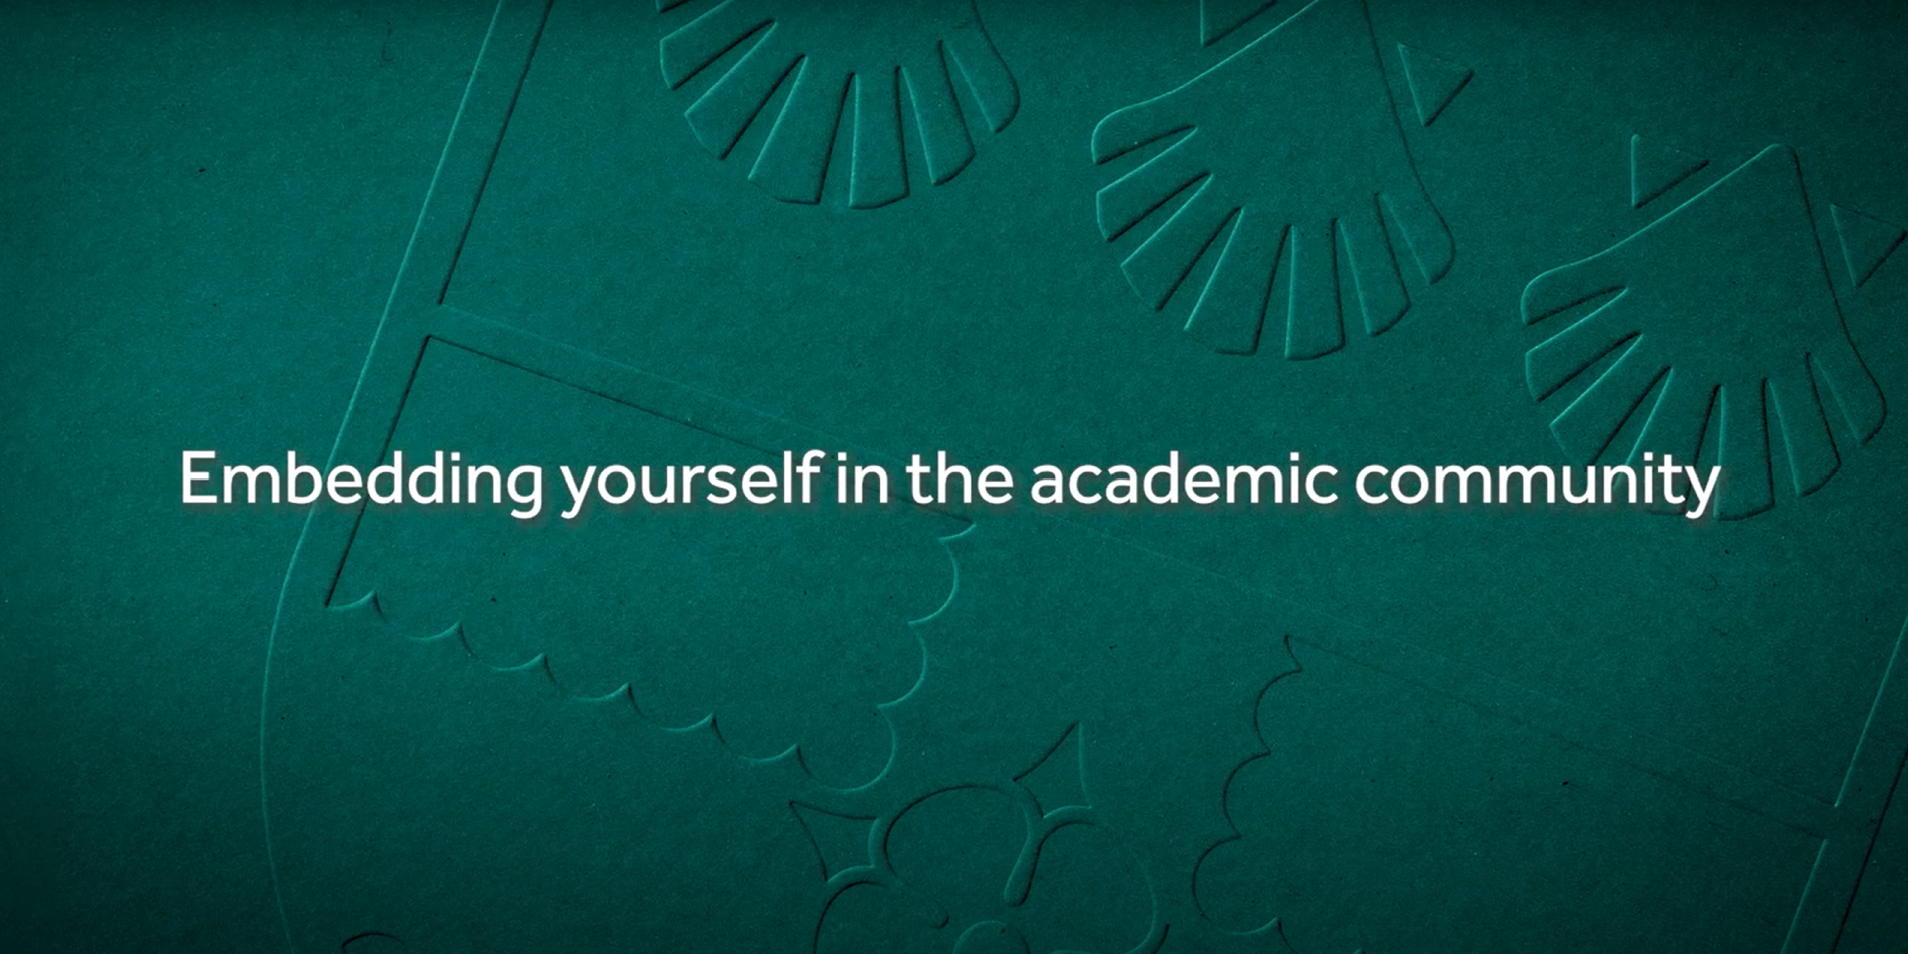 Title screen from a video titled 'Embedding yourself in the academic community'. The text is in white and the background is deep green.